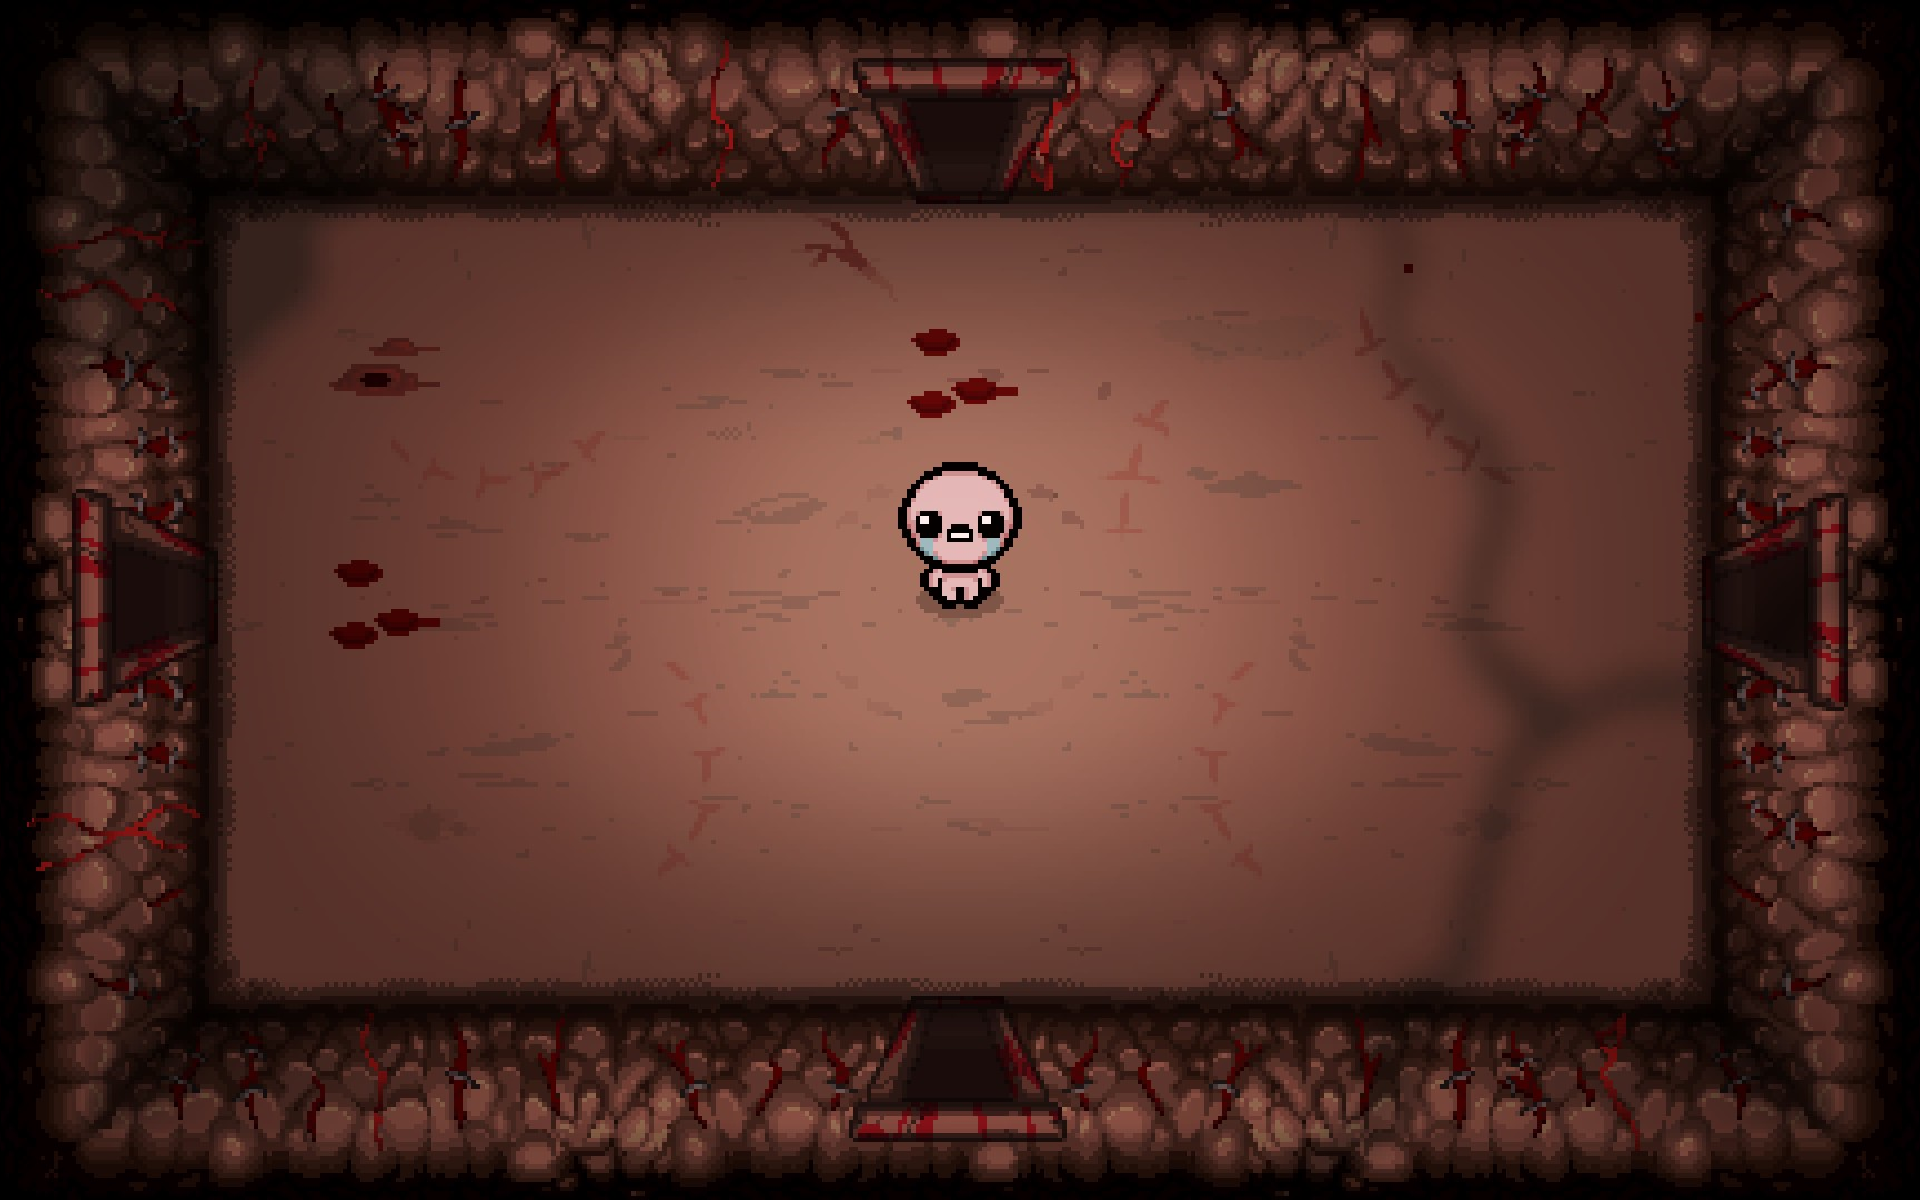 binding of isaac afterbirth wiki player 2